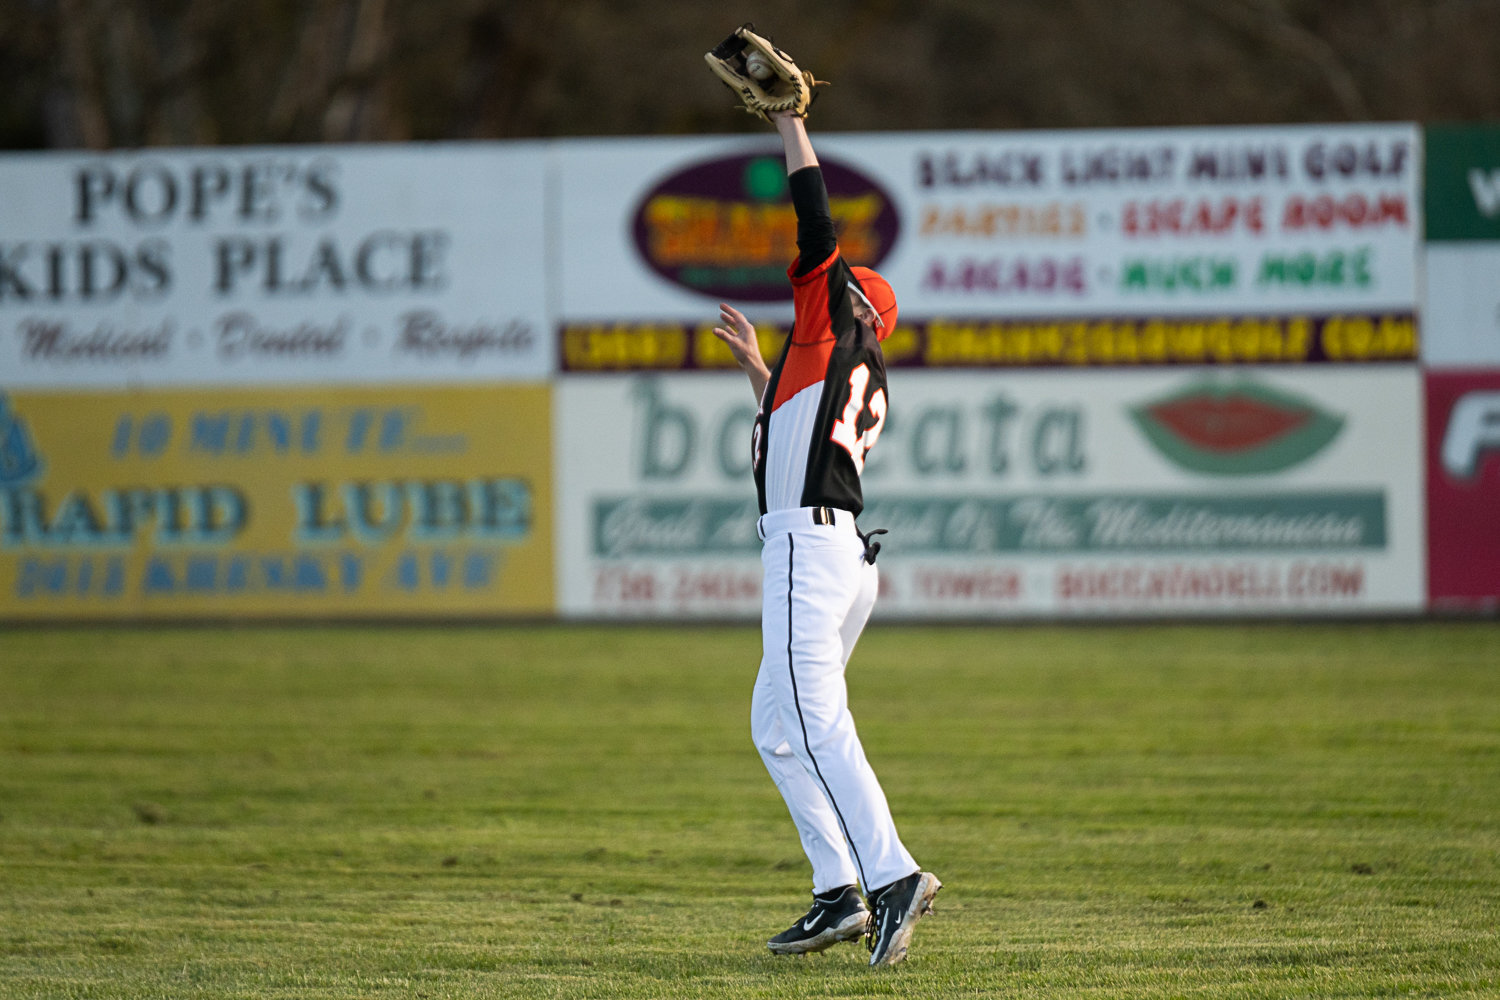 Kellen Rooklidge makes a catch in right field during Centralia's 14-13 win over Aberdeen on March 21.